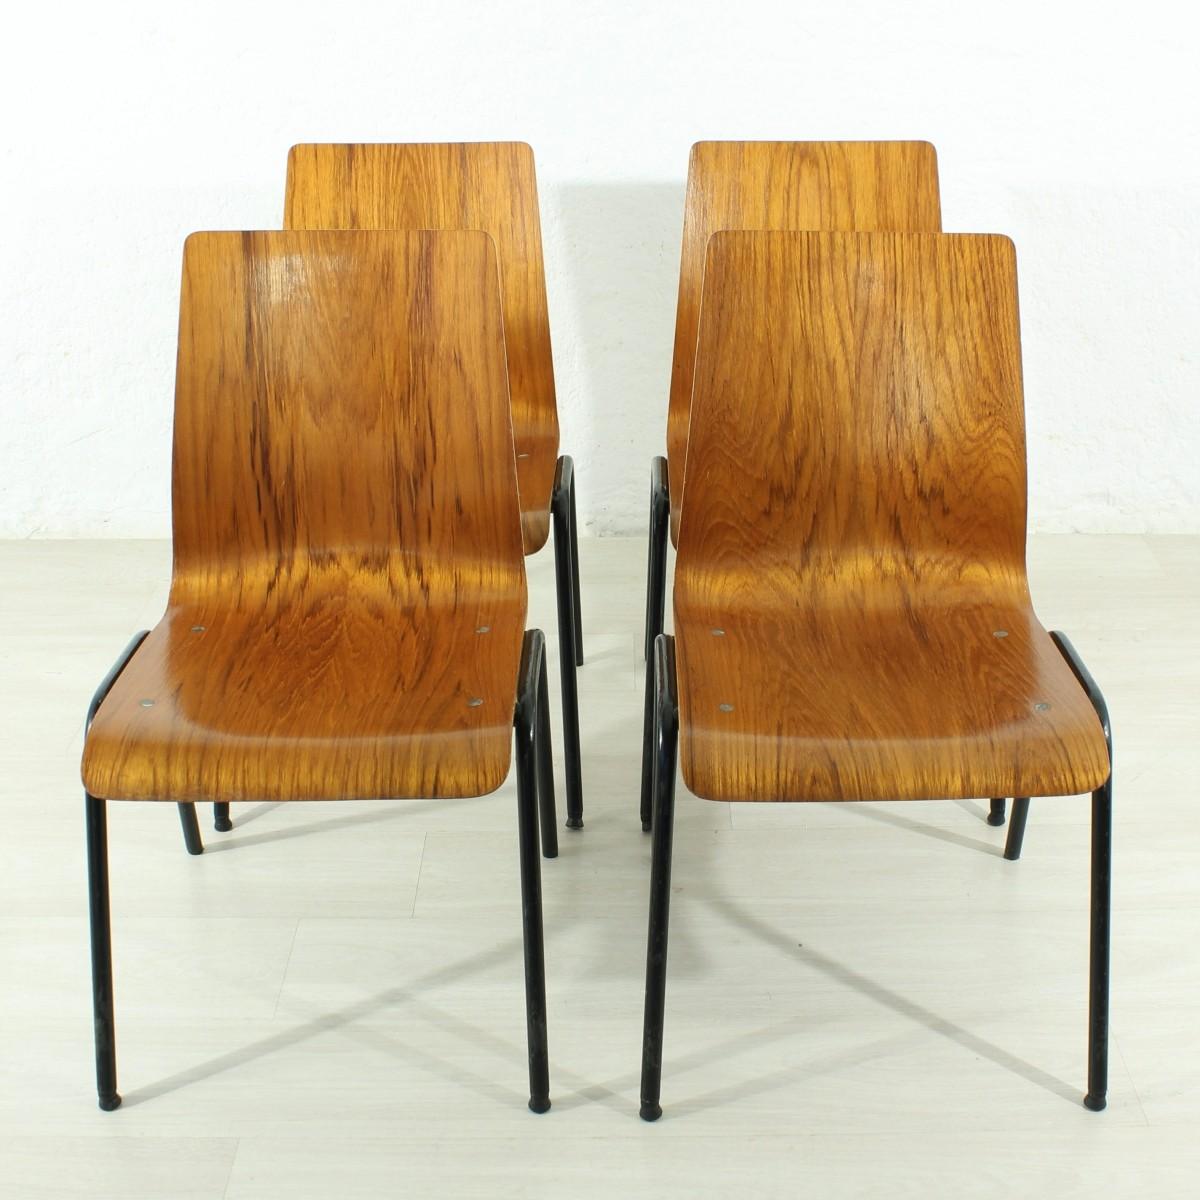 Set of 4 1960s Teak Chairs For Sale 1